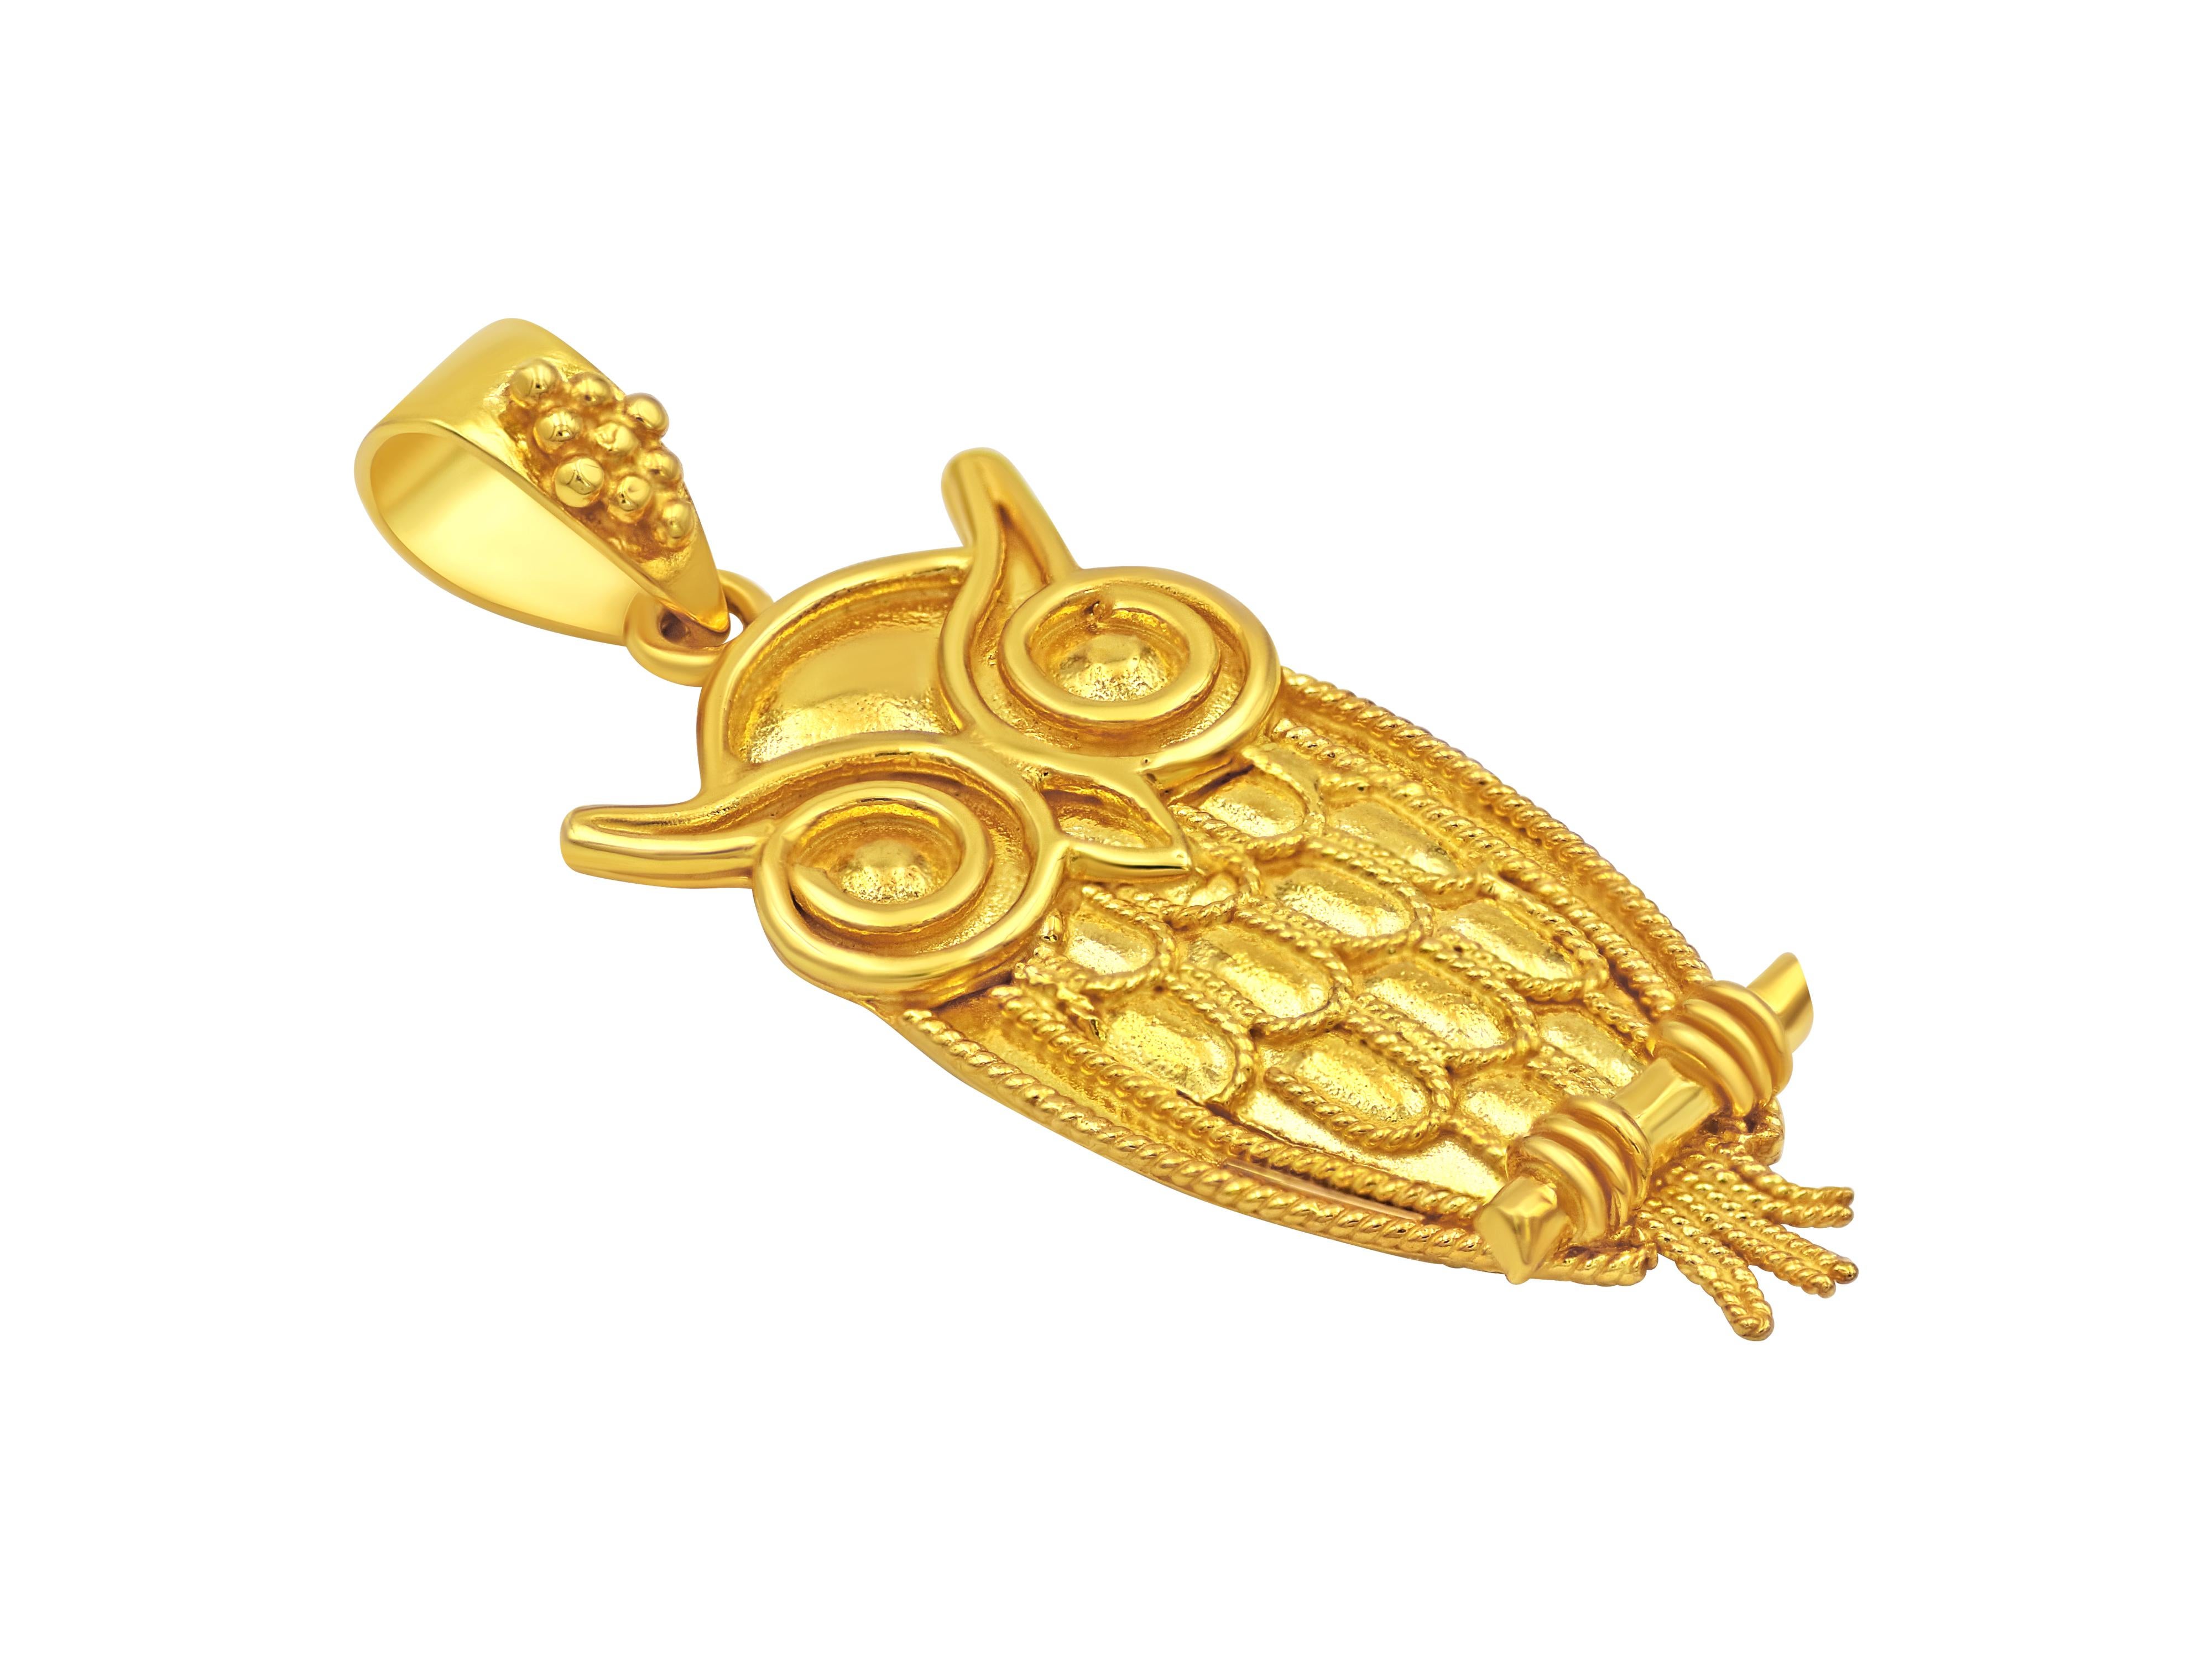 The owl pendant in 18 karat yellow gold handcrafted with filigree wires and decorated with granulation. 
Simple and very classy can be worn attached to anything and give it any level of formality you intend to. 
Symbol of Athens and wisdom was the